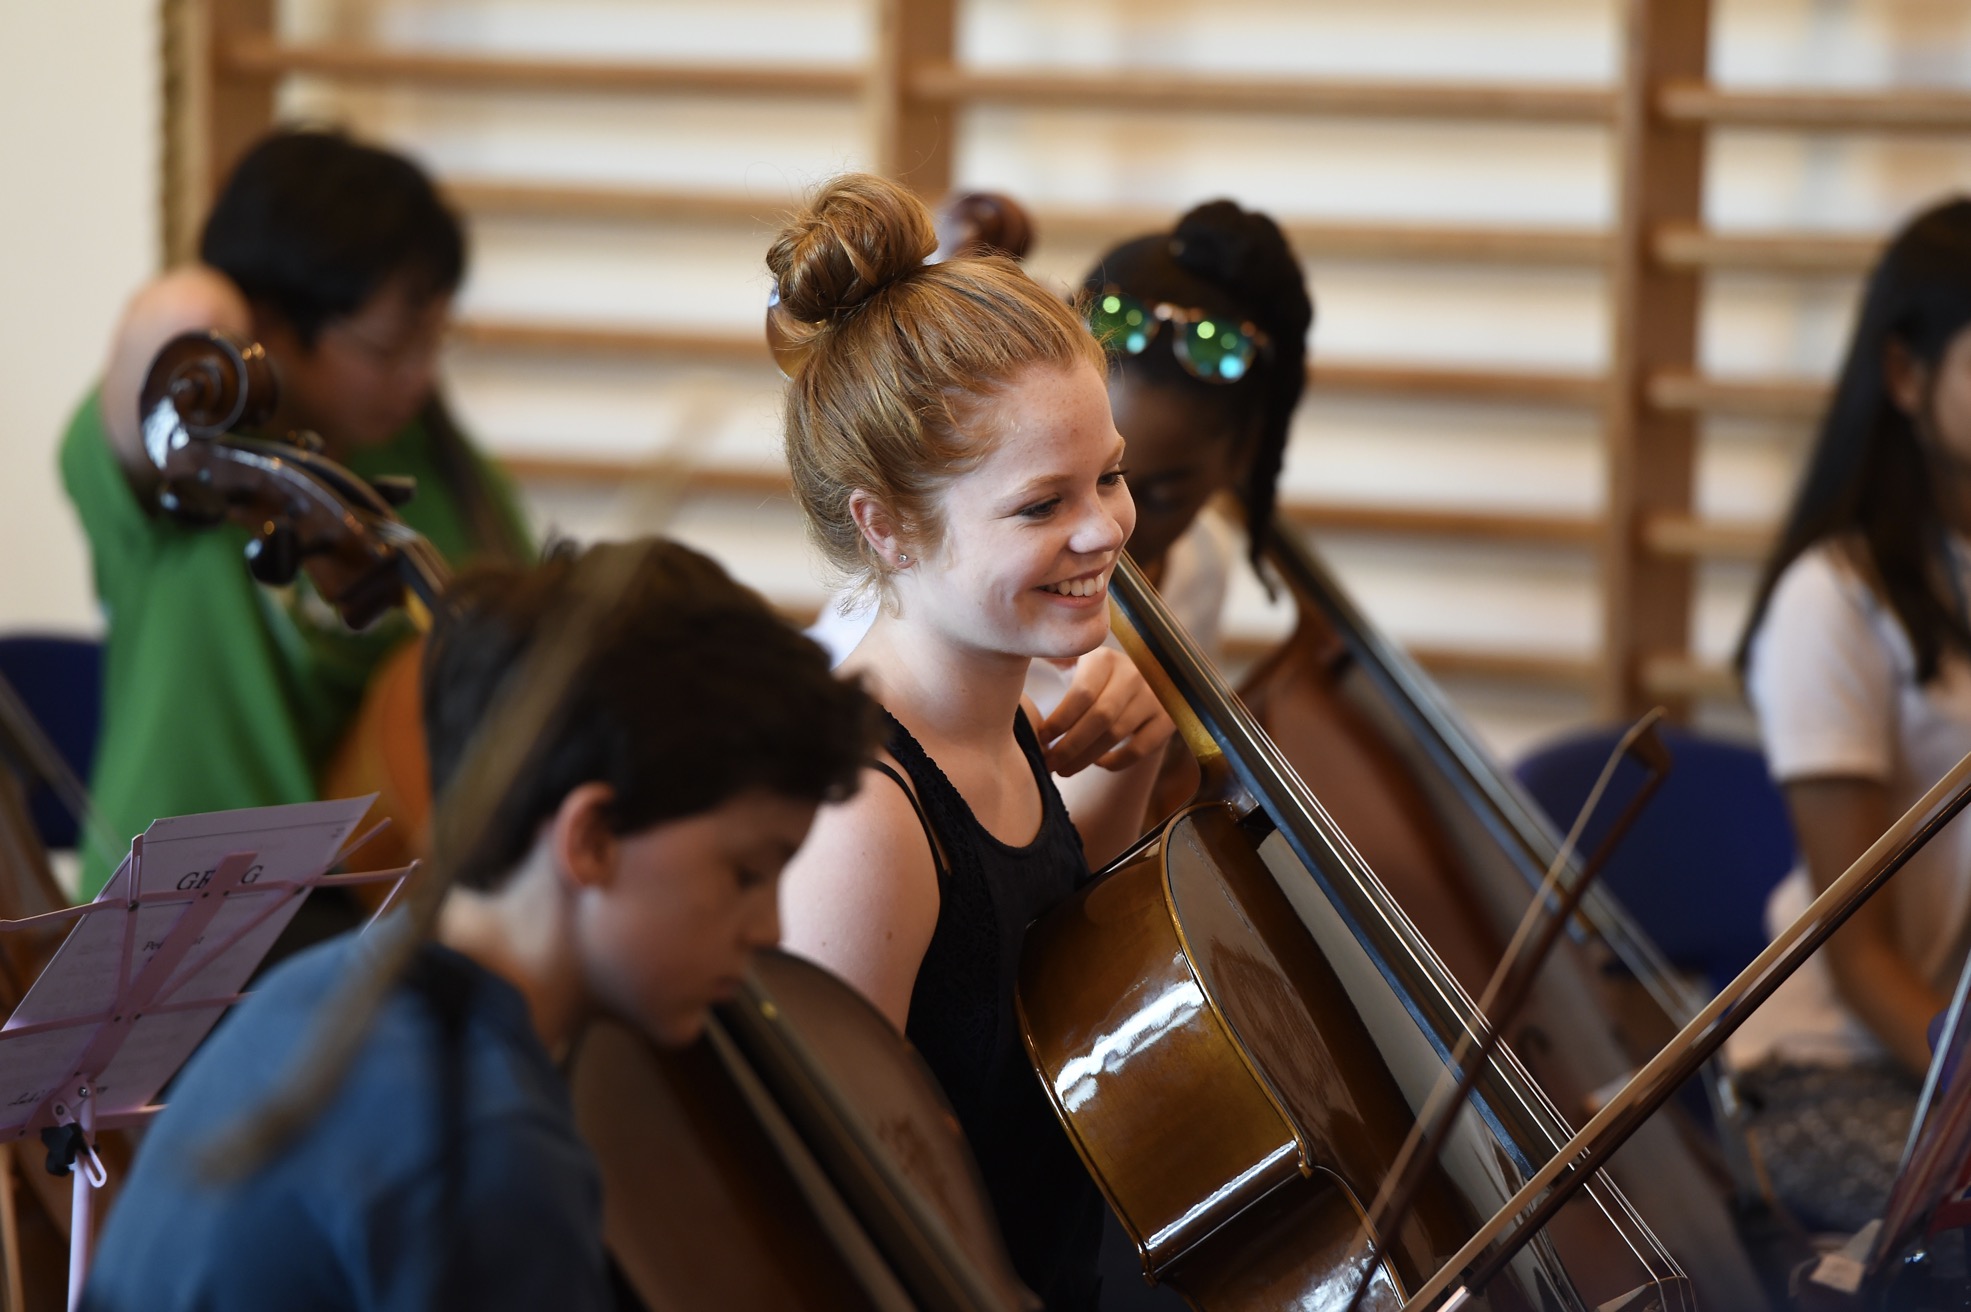 Happy anticipation among the cellists awaiting the arrival of a very special guest, July 2018 